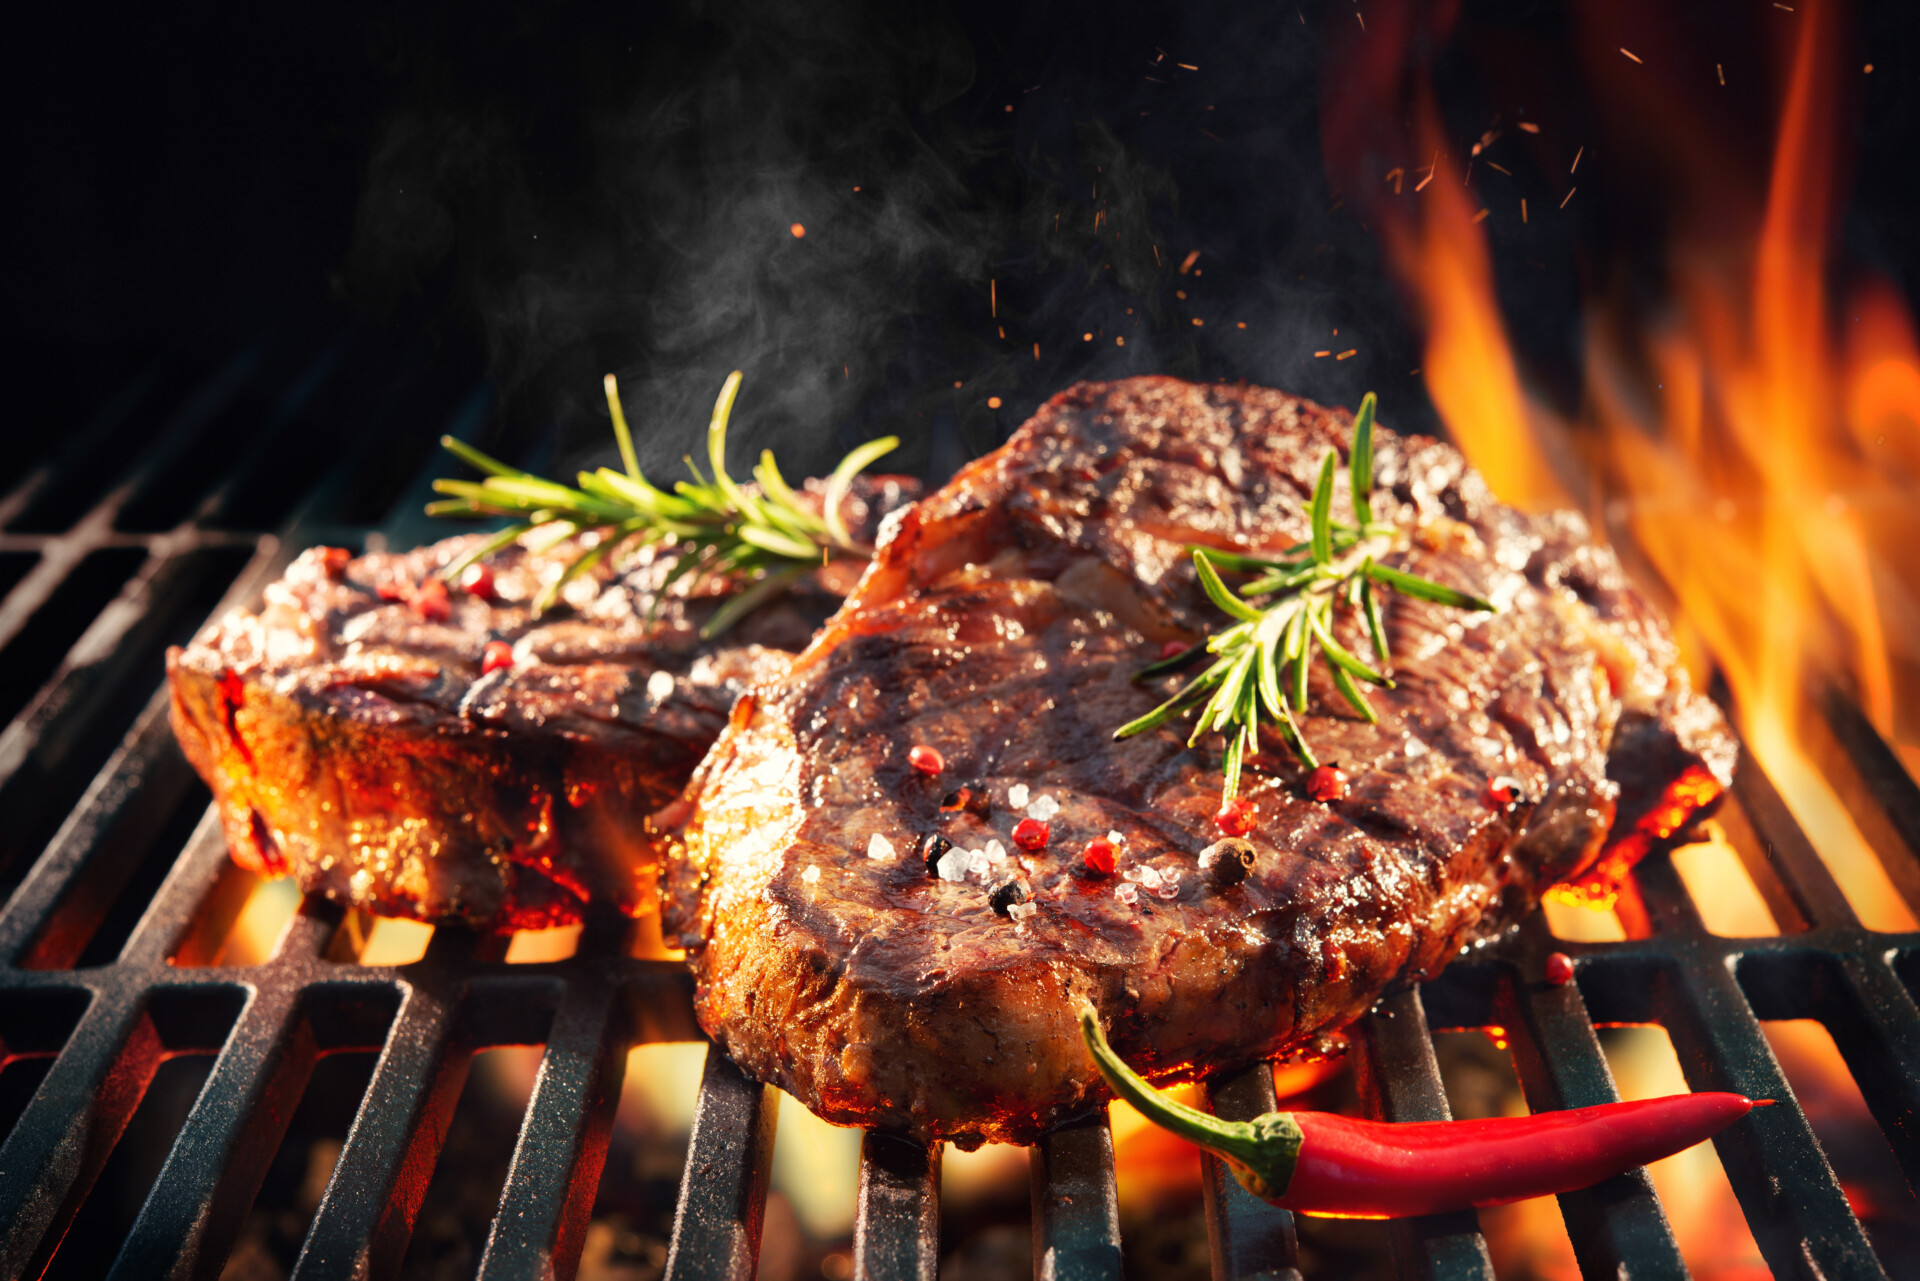 Beef,Steaks,Sizzling,On,The,Grill,With,Flames